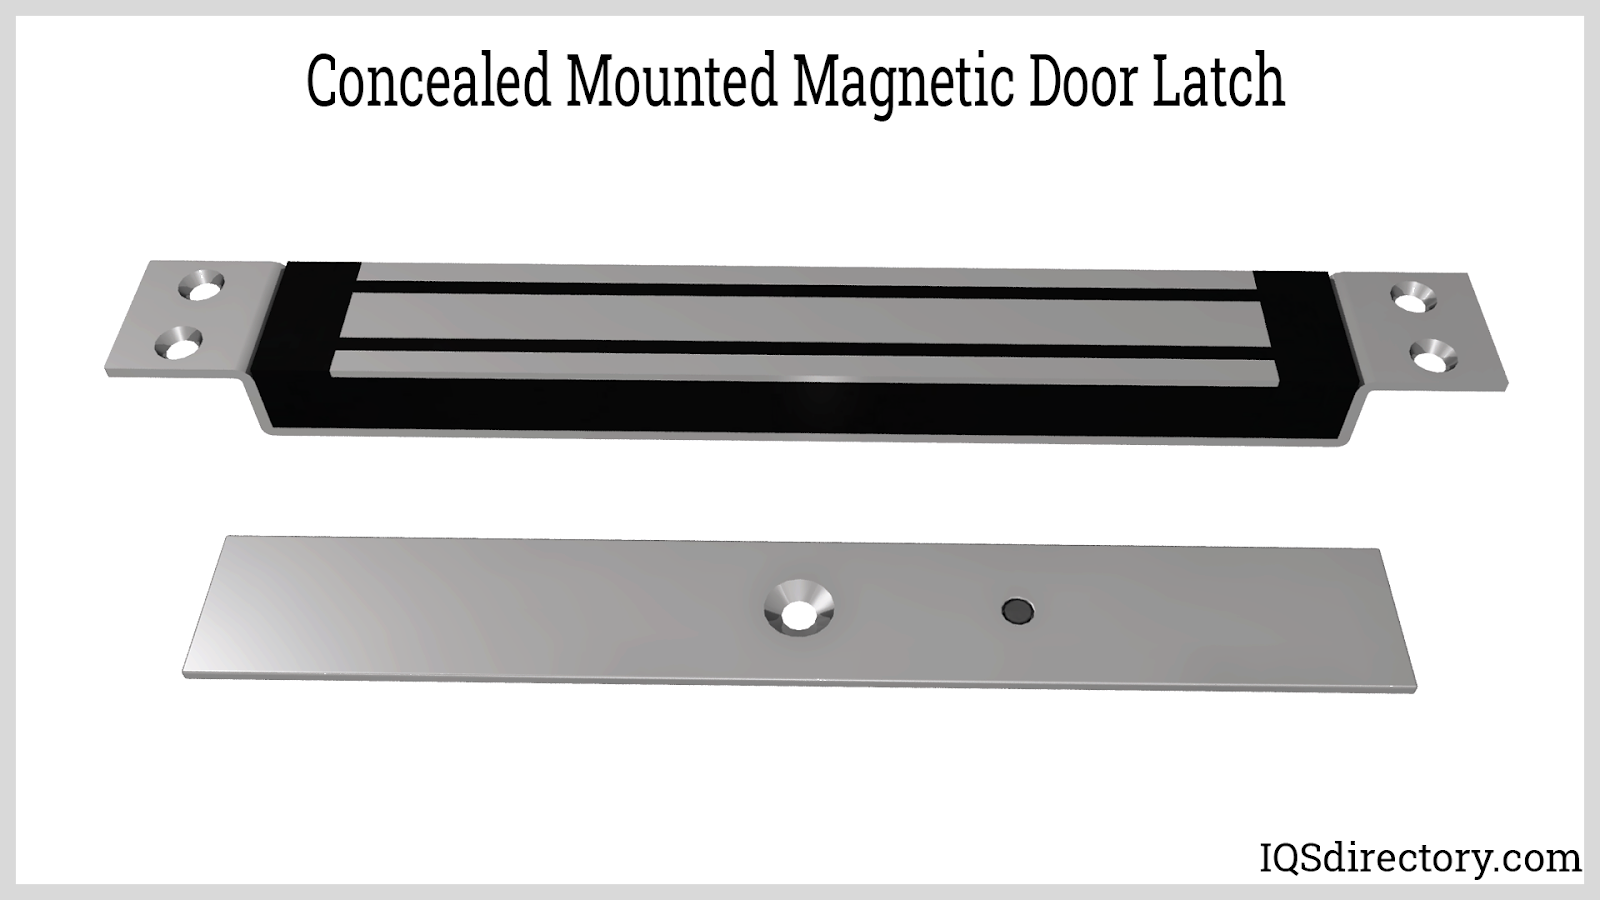 Concealed Mounted Magnetic Door Latch